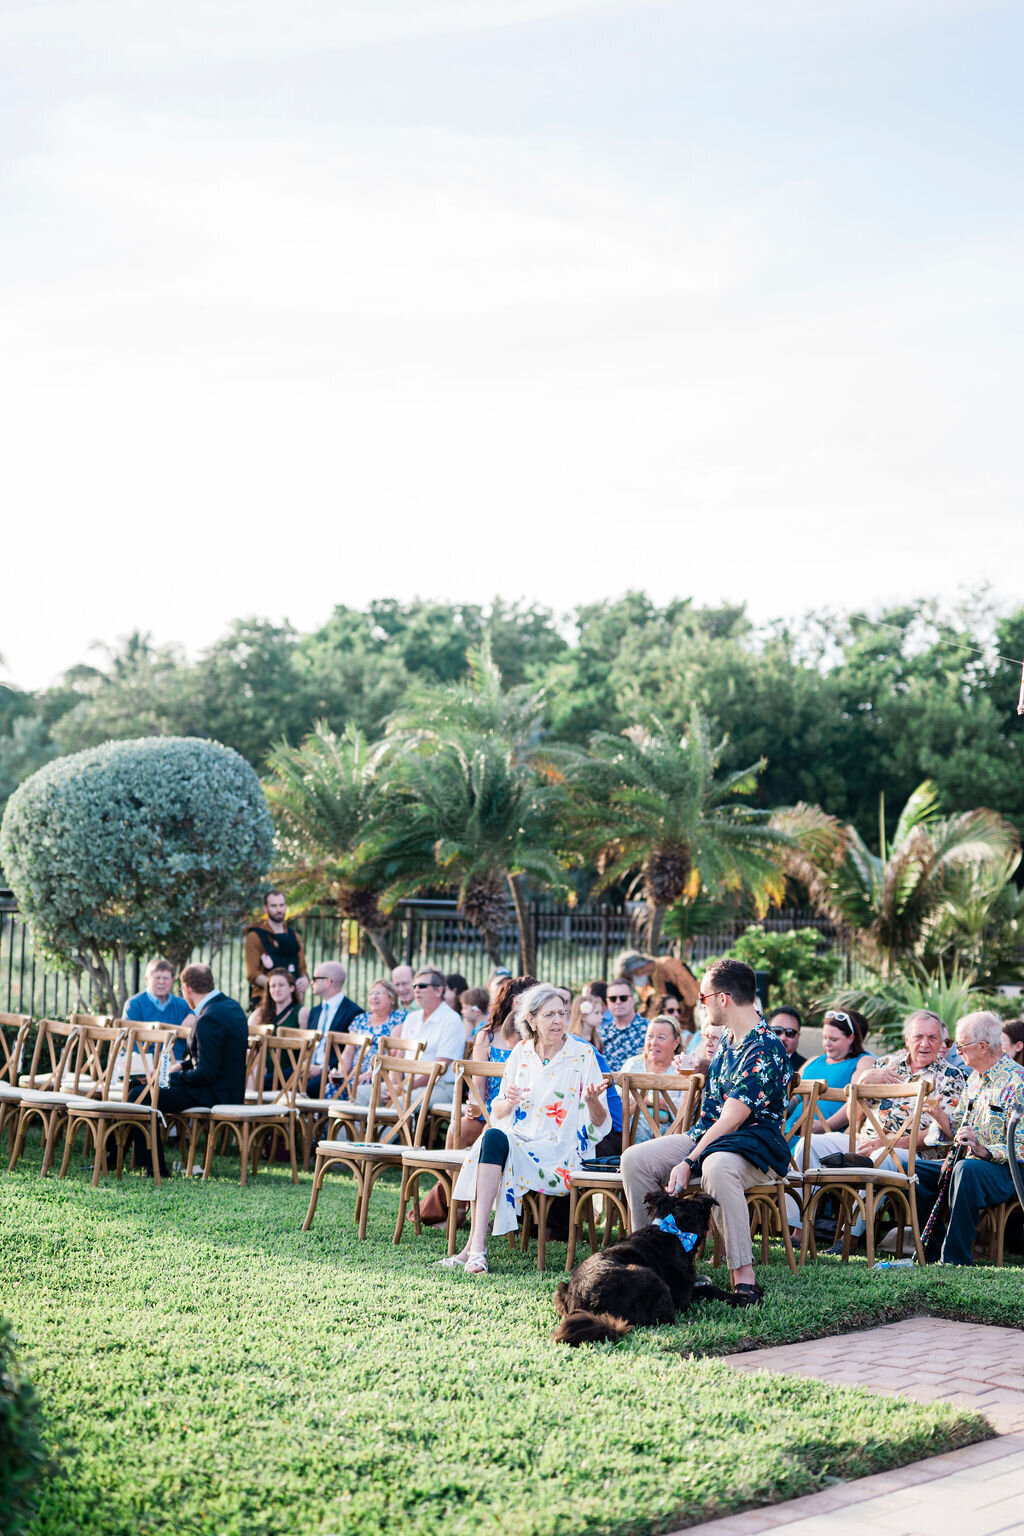 A Key West wedding ceremony at a private residence in Key West